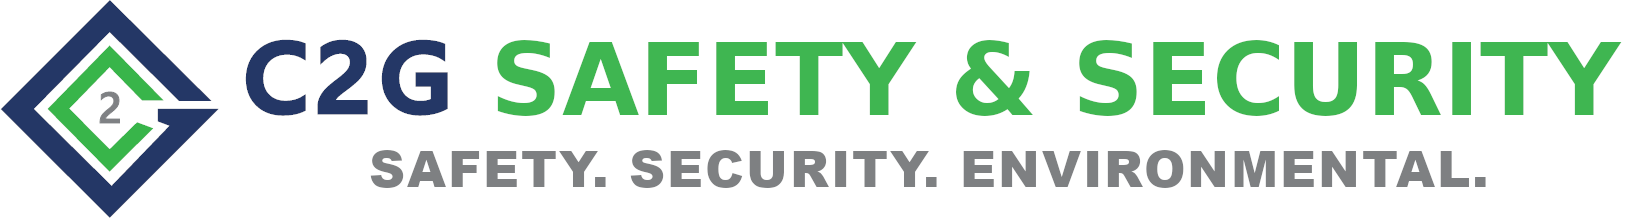 C2G Safety & Security